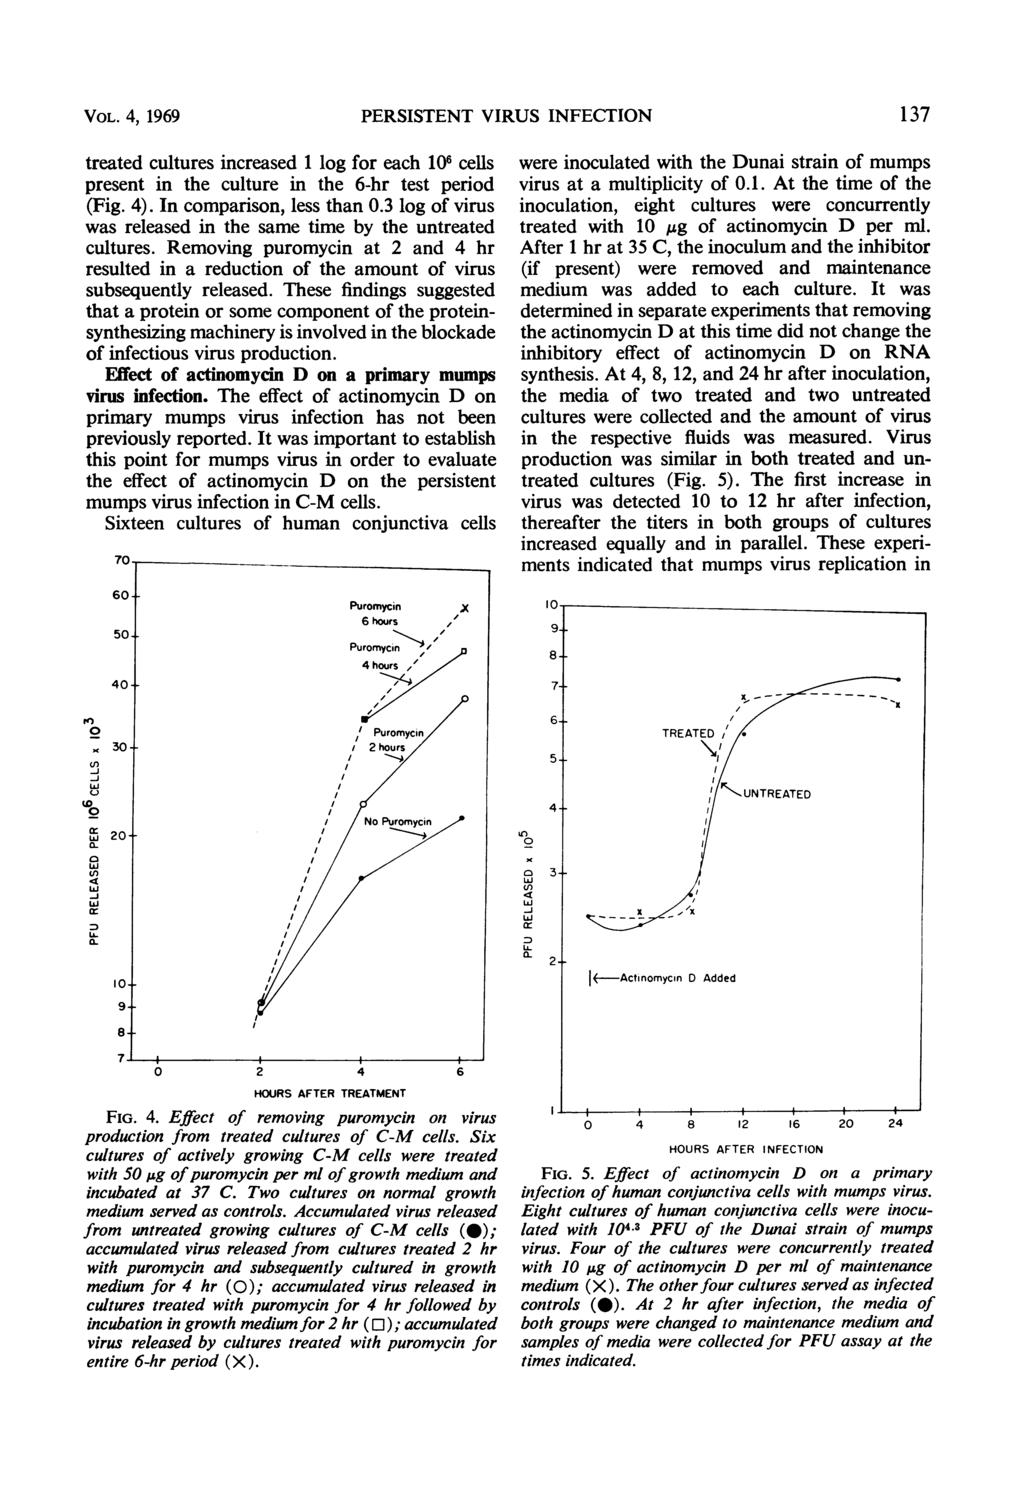 VOL. 4, 1969 PERSISTENT VIRUS INFECTION 137 treated cultures increased 1 log for each 16 cells present in the culture in the 6-hr test period (Fig. 4). In comparison, less than.